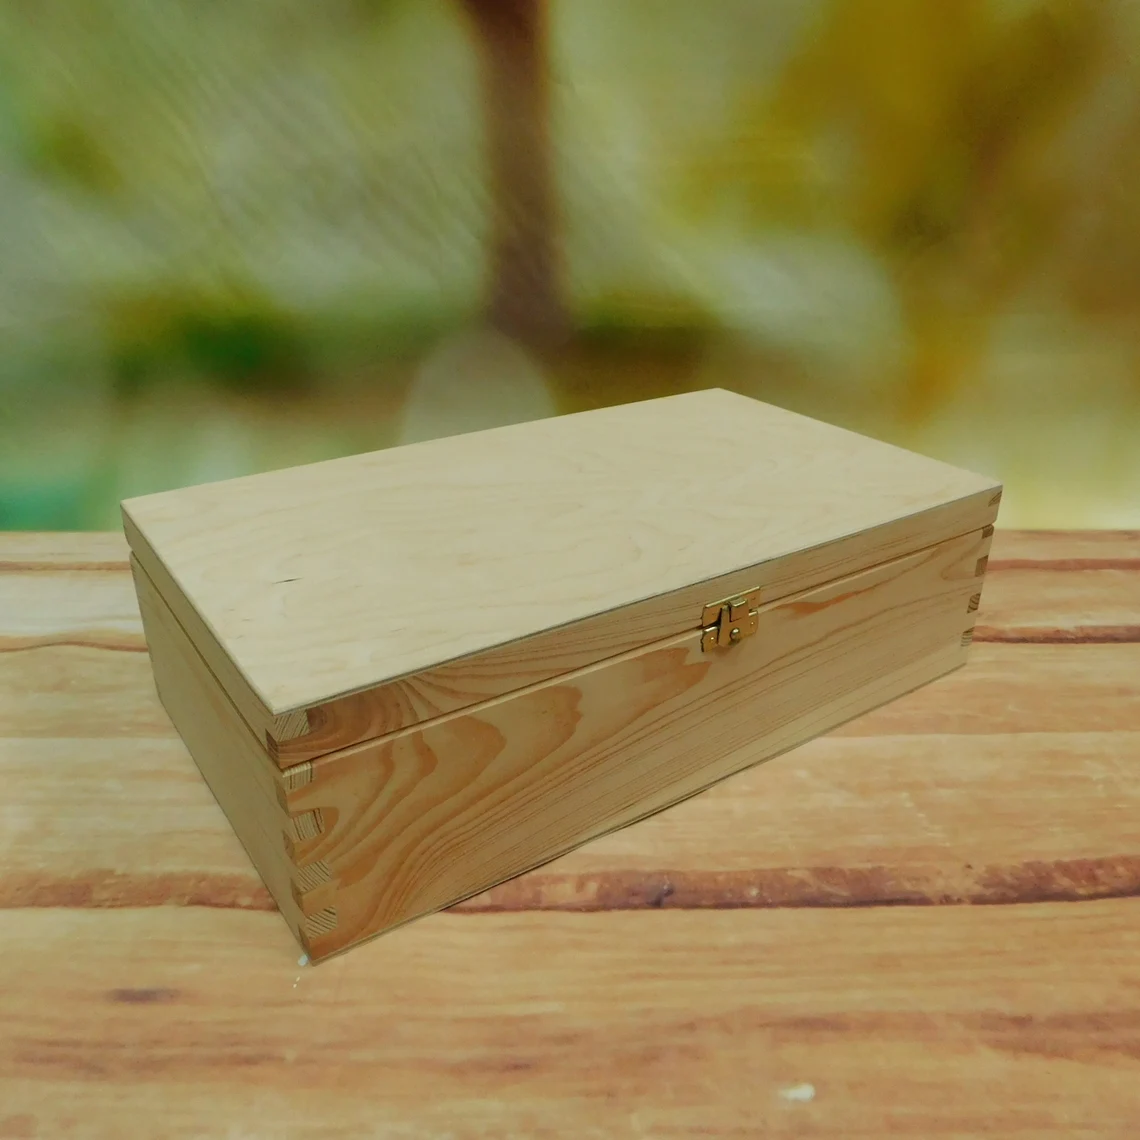 Plain Wooden Box With A Divider For 2 Wine Bottles